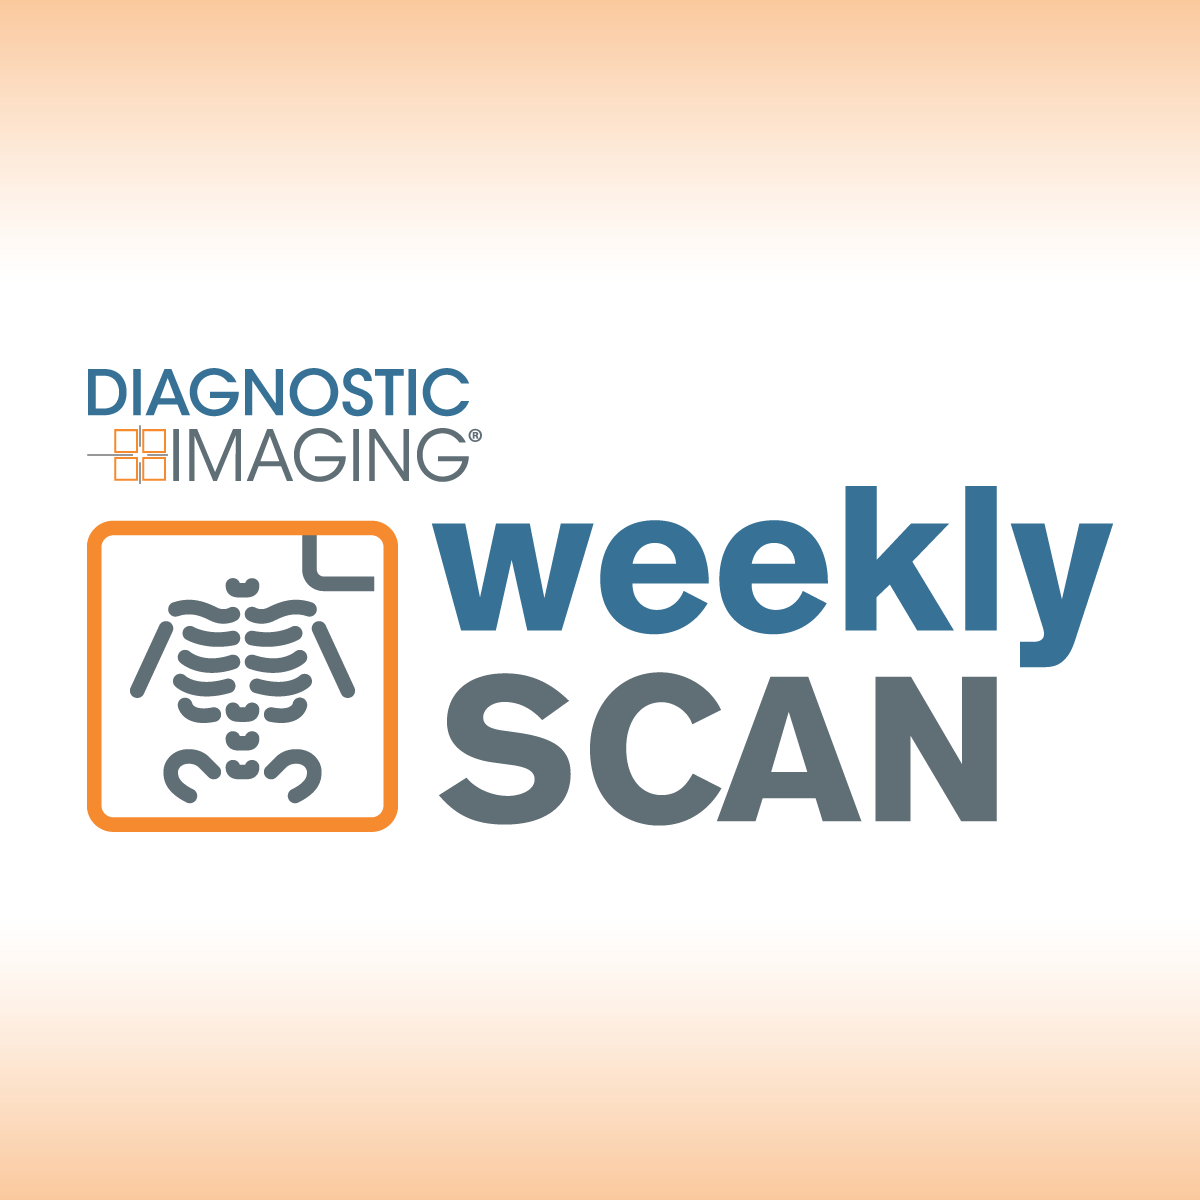 Diagnostic Imaging's Weekly Scan: December 31-January 6